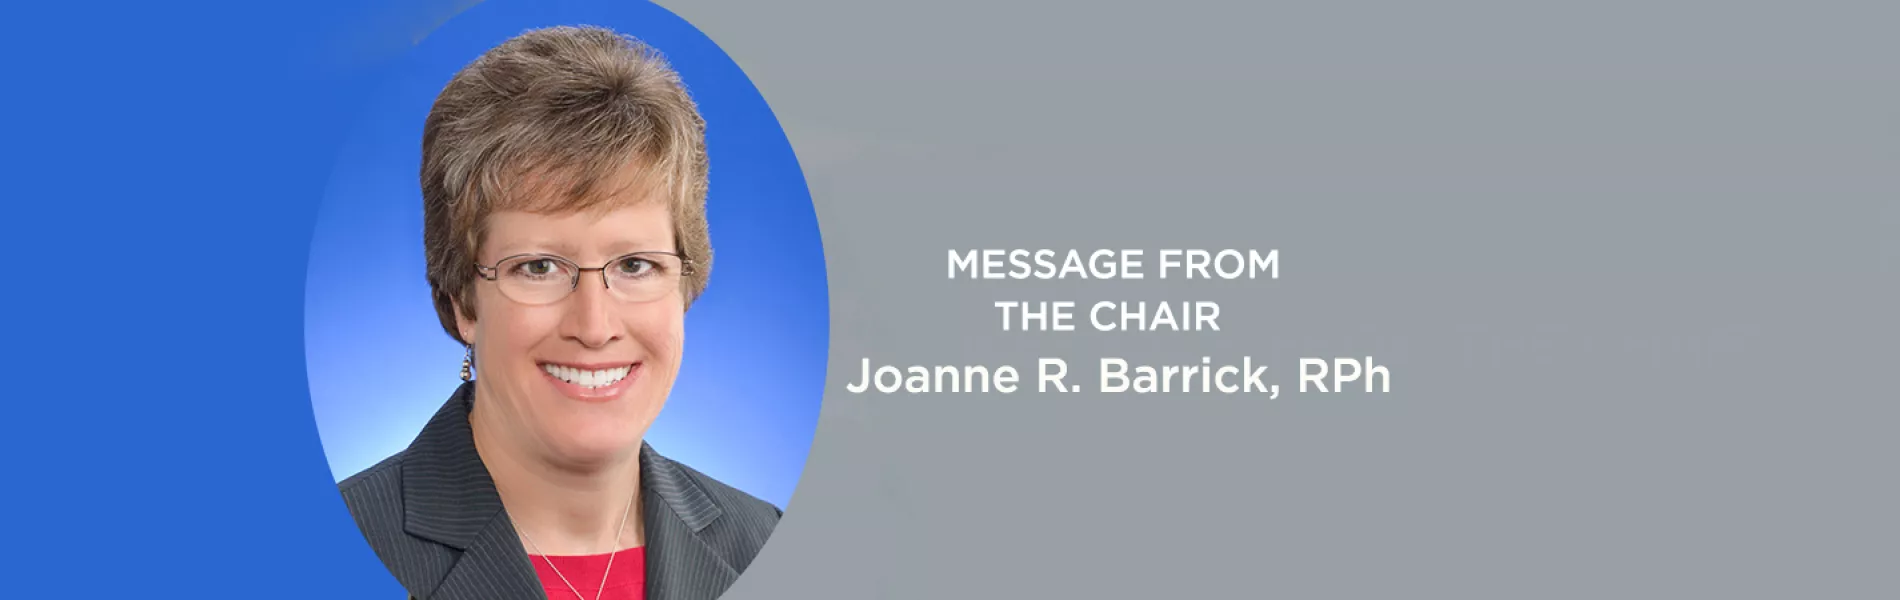 Message from the Chair: Joanne R. Barrick, RPh